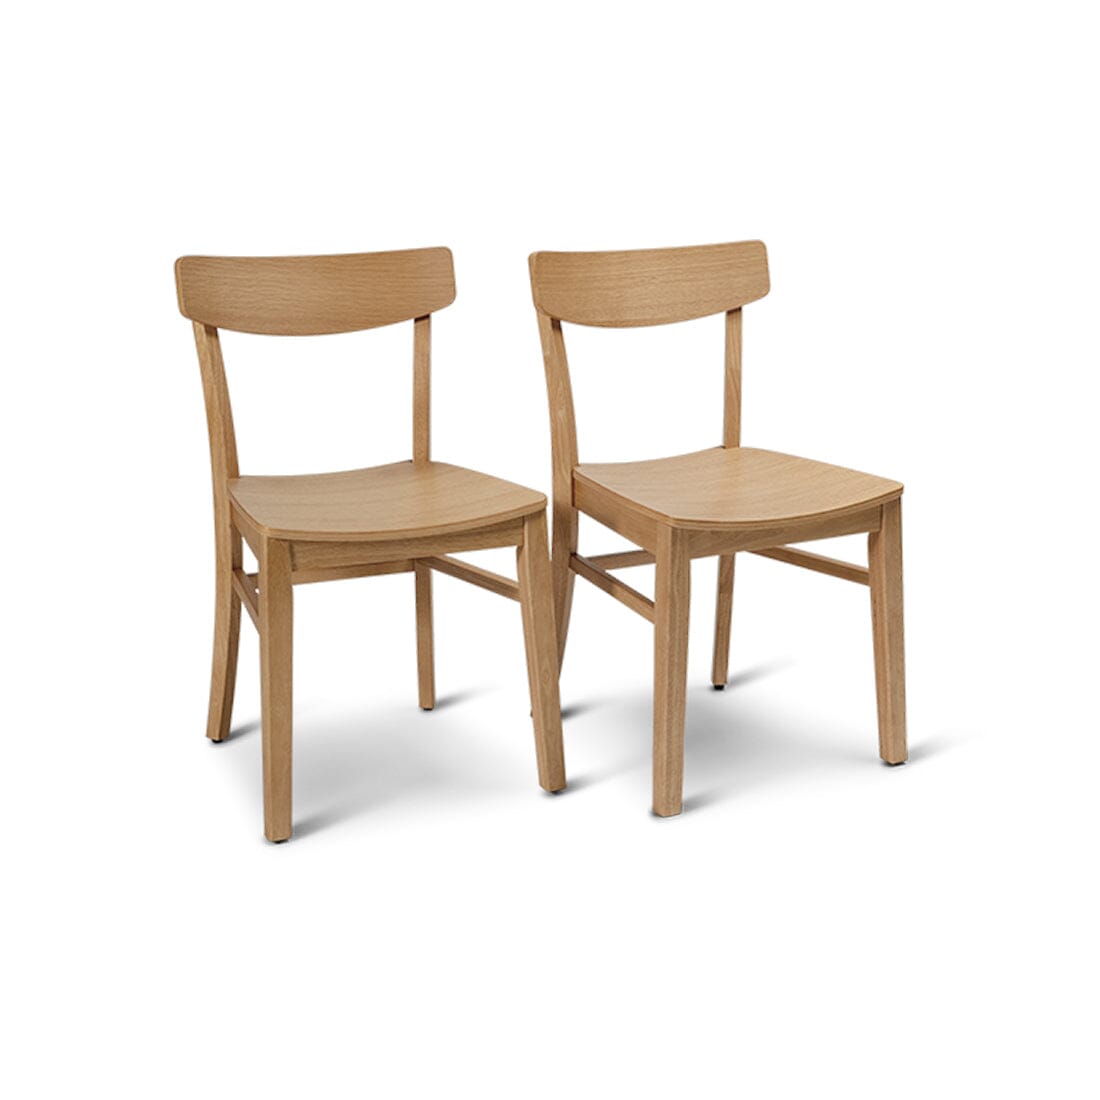 Ella Pale Oak Dining Table Set - 6 Seater - Pale Oak Dining Chairs